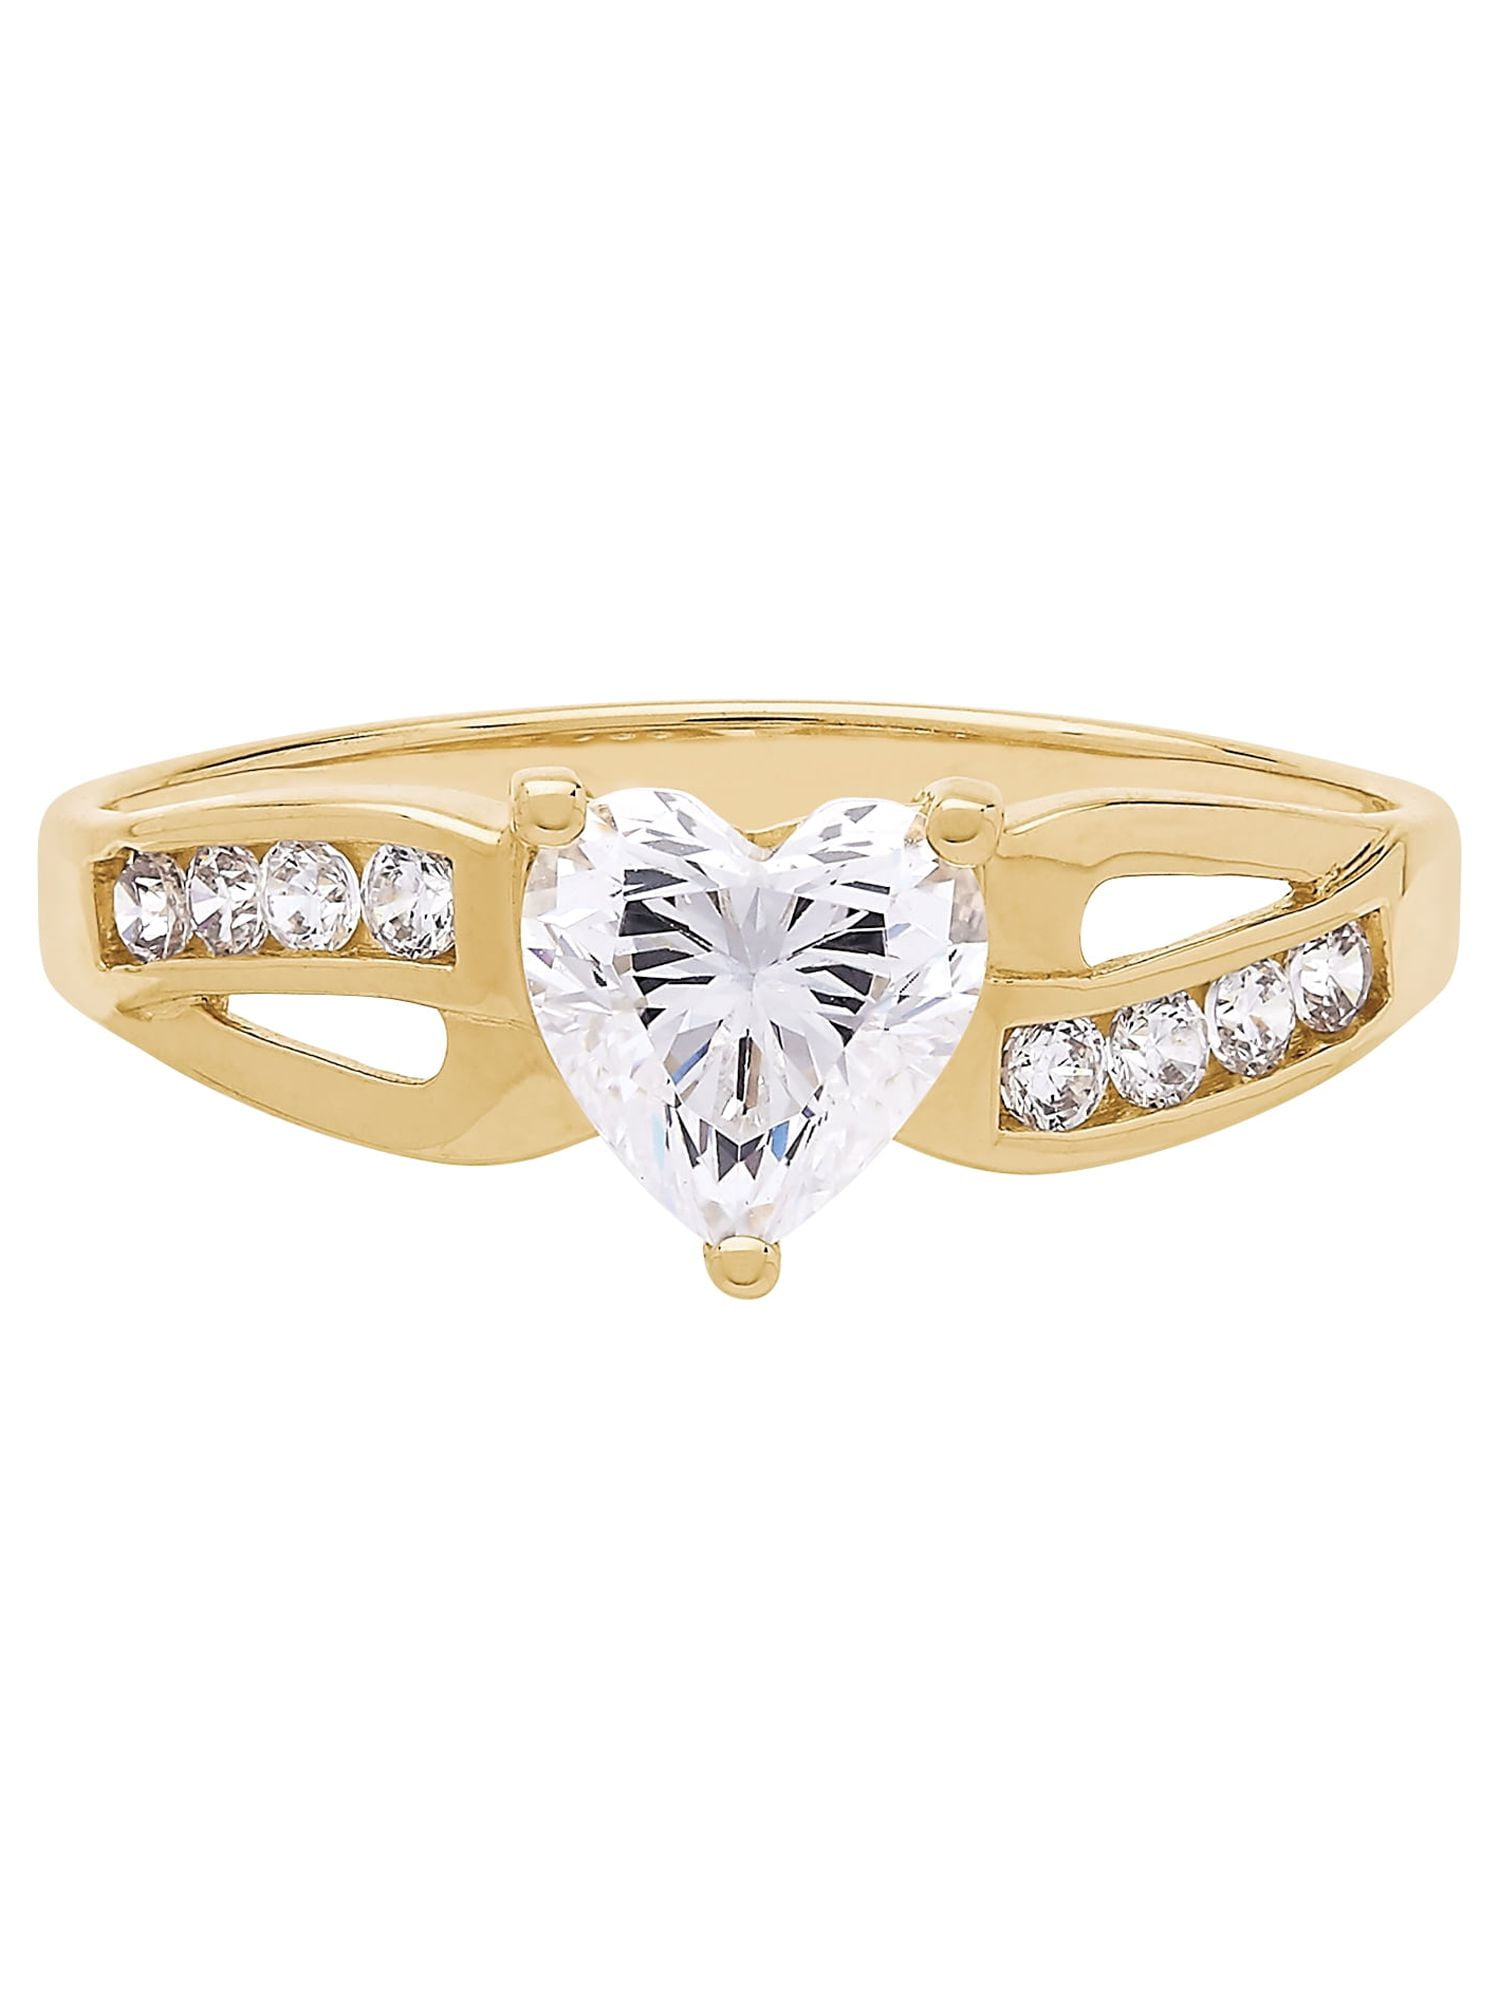 Silver Emerald Cut Cubic Zirconia Solitaire Ring